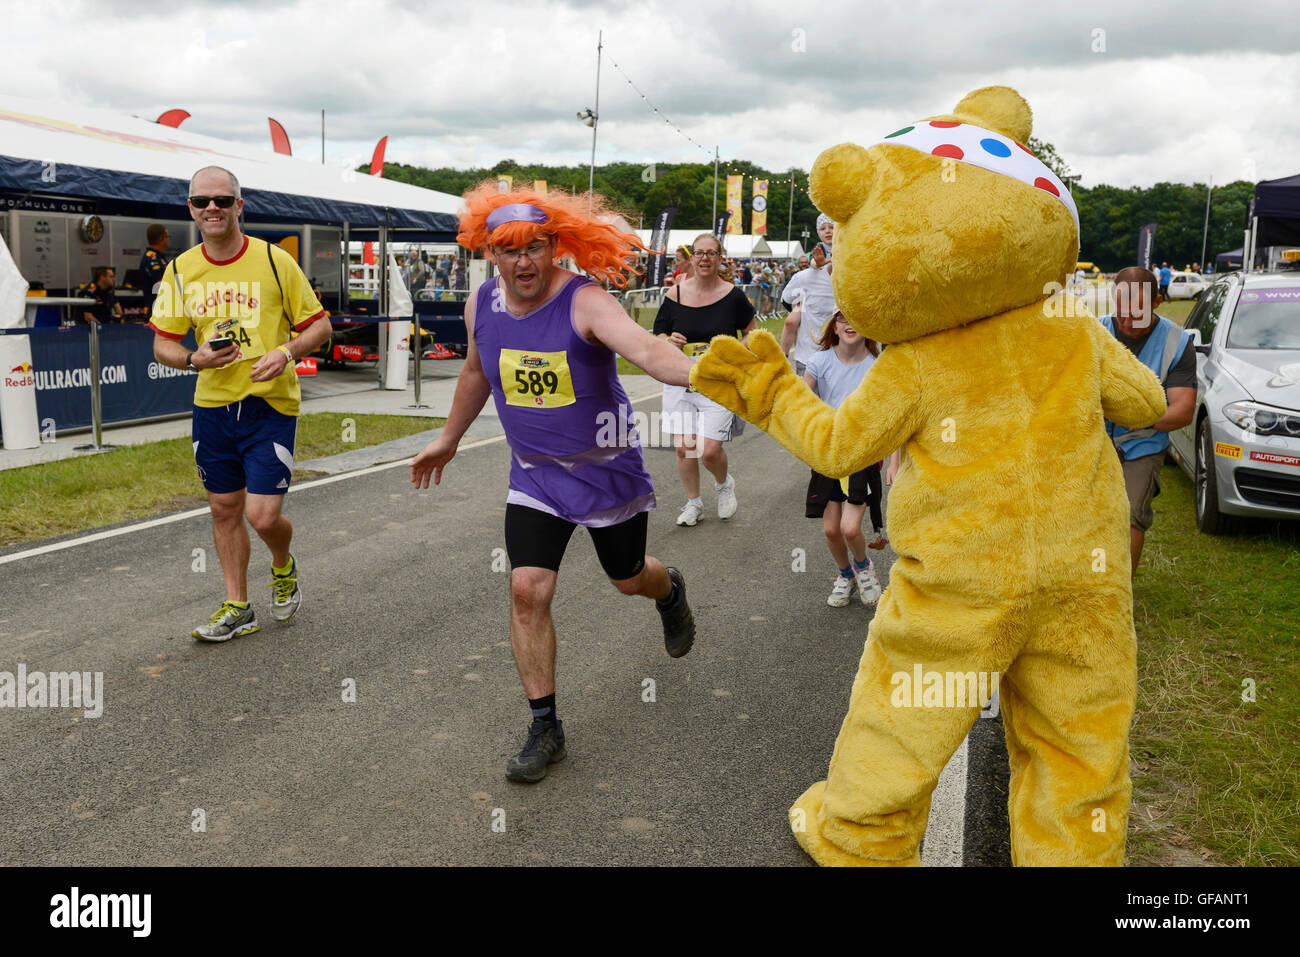 Carfest North, Bolesworth, Cheshire, UK. 30th July 2016. Pusey giving high fives to competitors as they reach the finish line of the Great Festival Dash fun run in aid of Children In Need. The event is the brainchild of Chris Evans and features 3 days of cars, music and entertainment with profits being donated to the charity Children in Need. Andrew Paterson/Alamy Live News Stock Photo